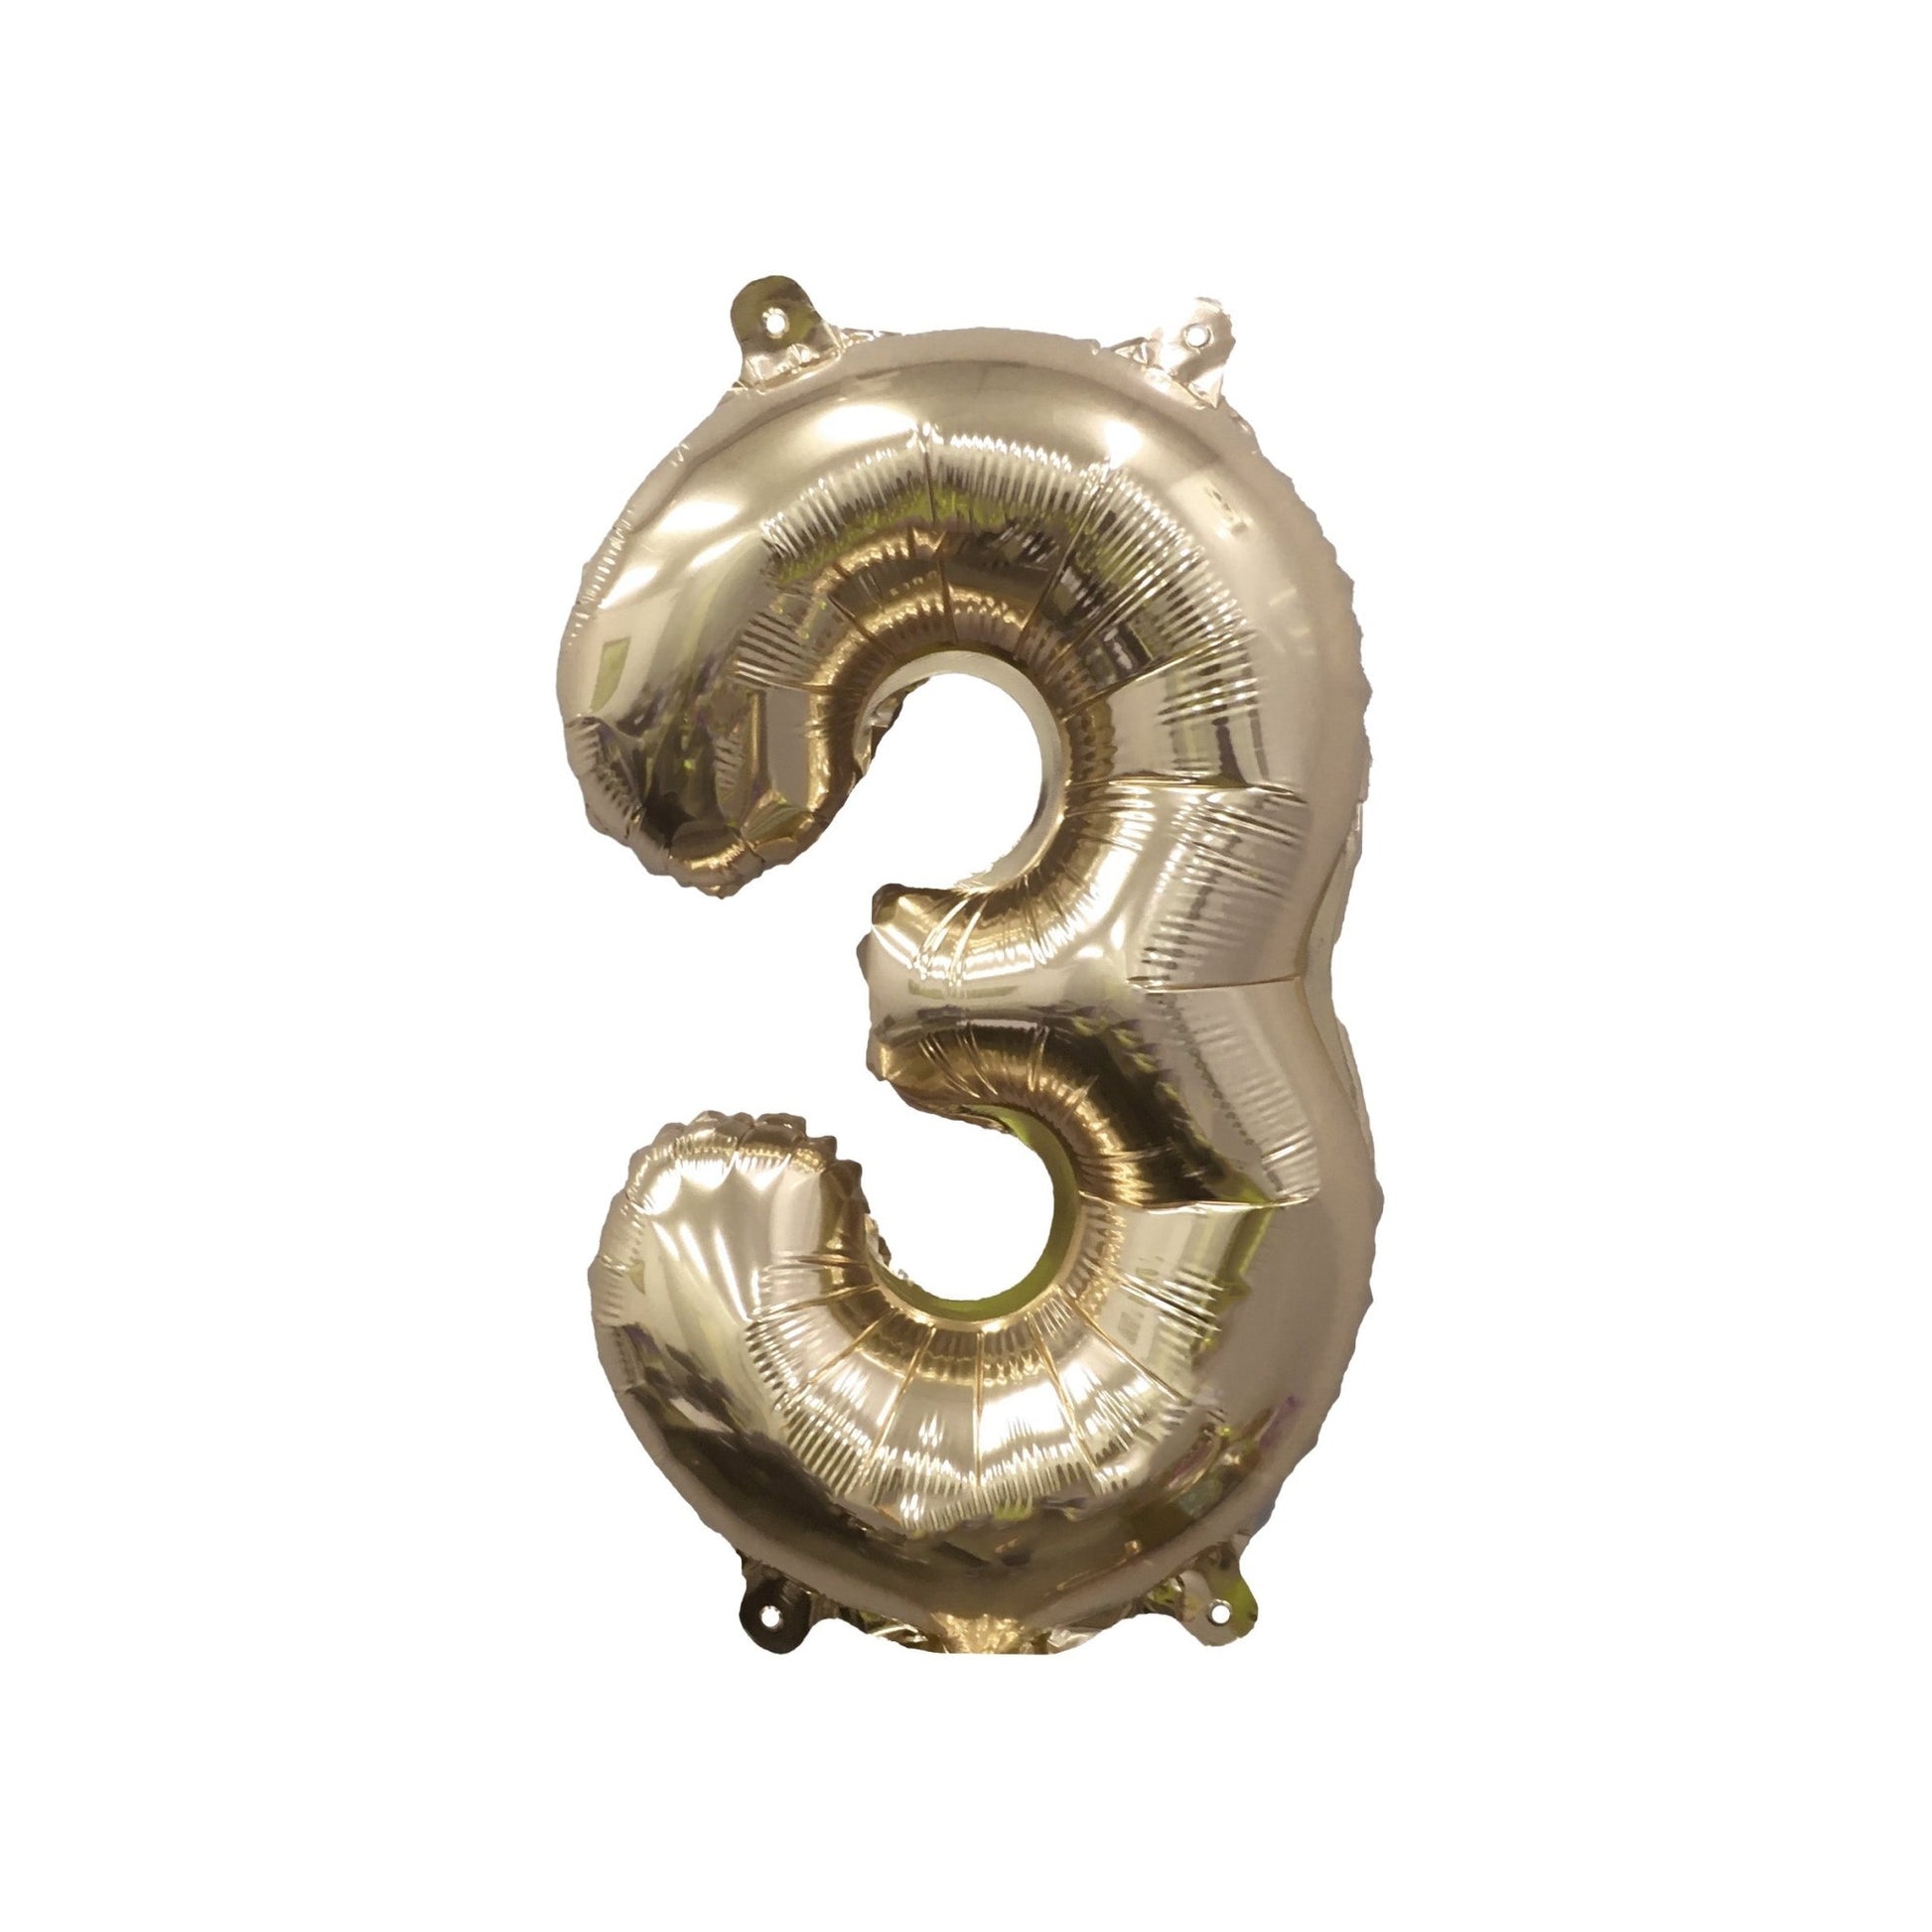 NYE 2023 Giant Gold Mylar Foil Number Balloons (32 Inches) - Ellie's Party Supply